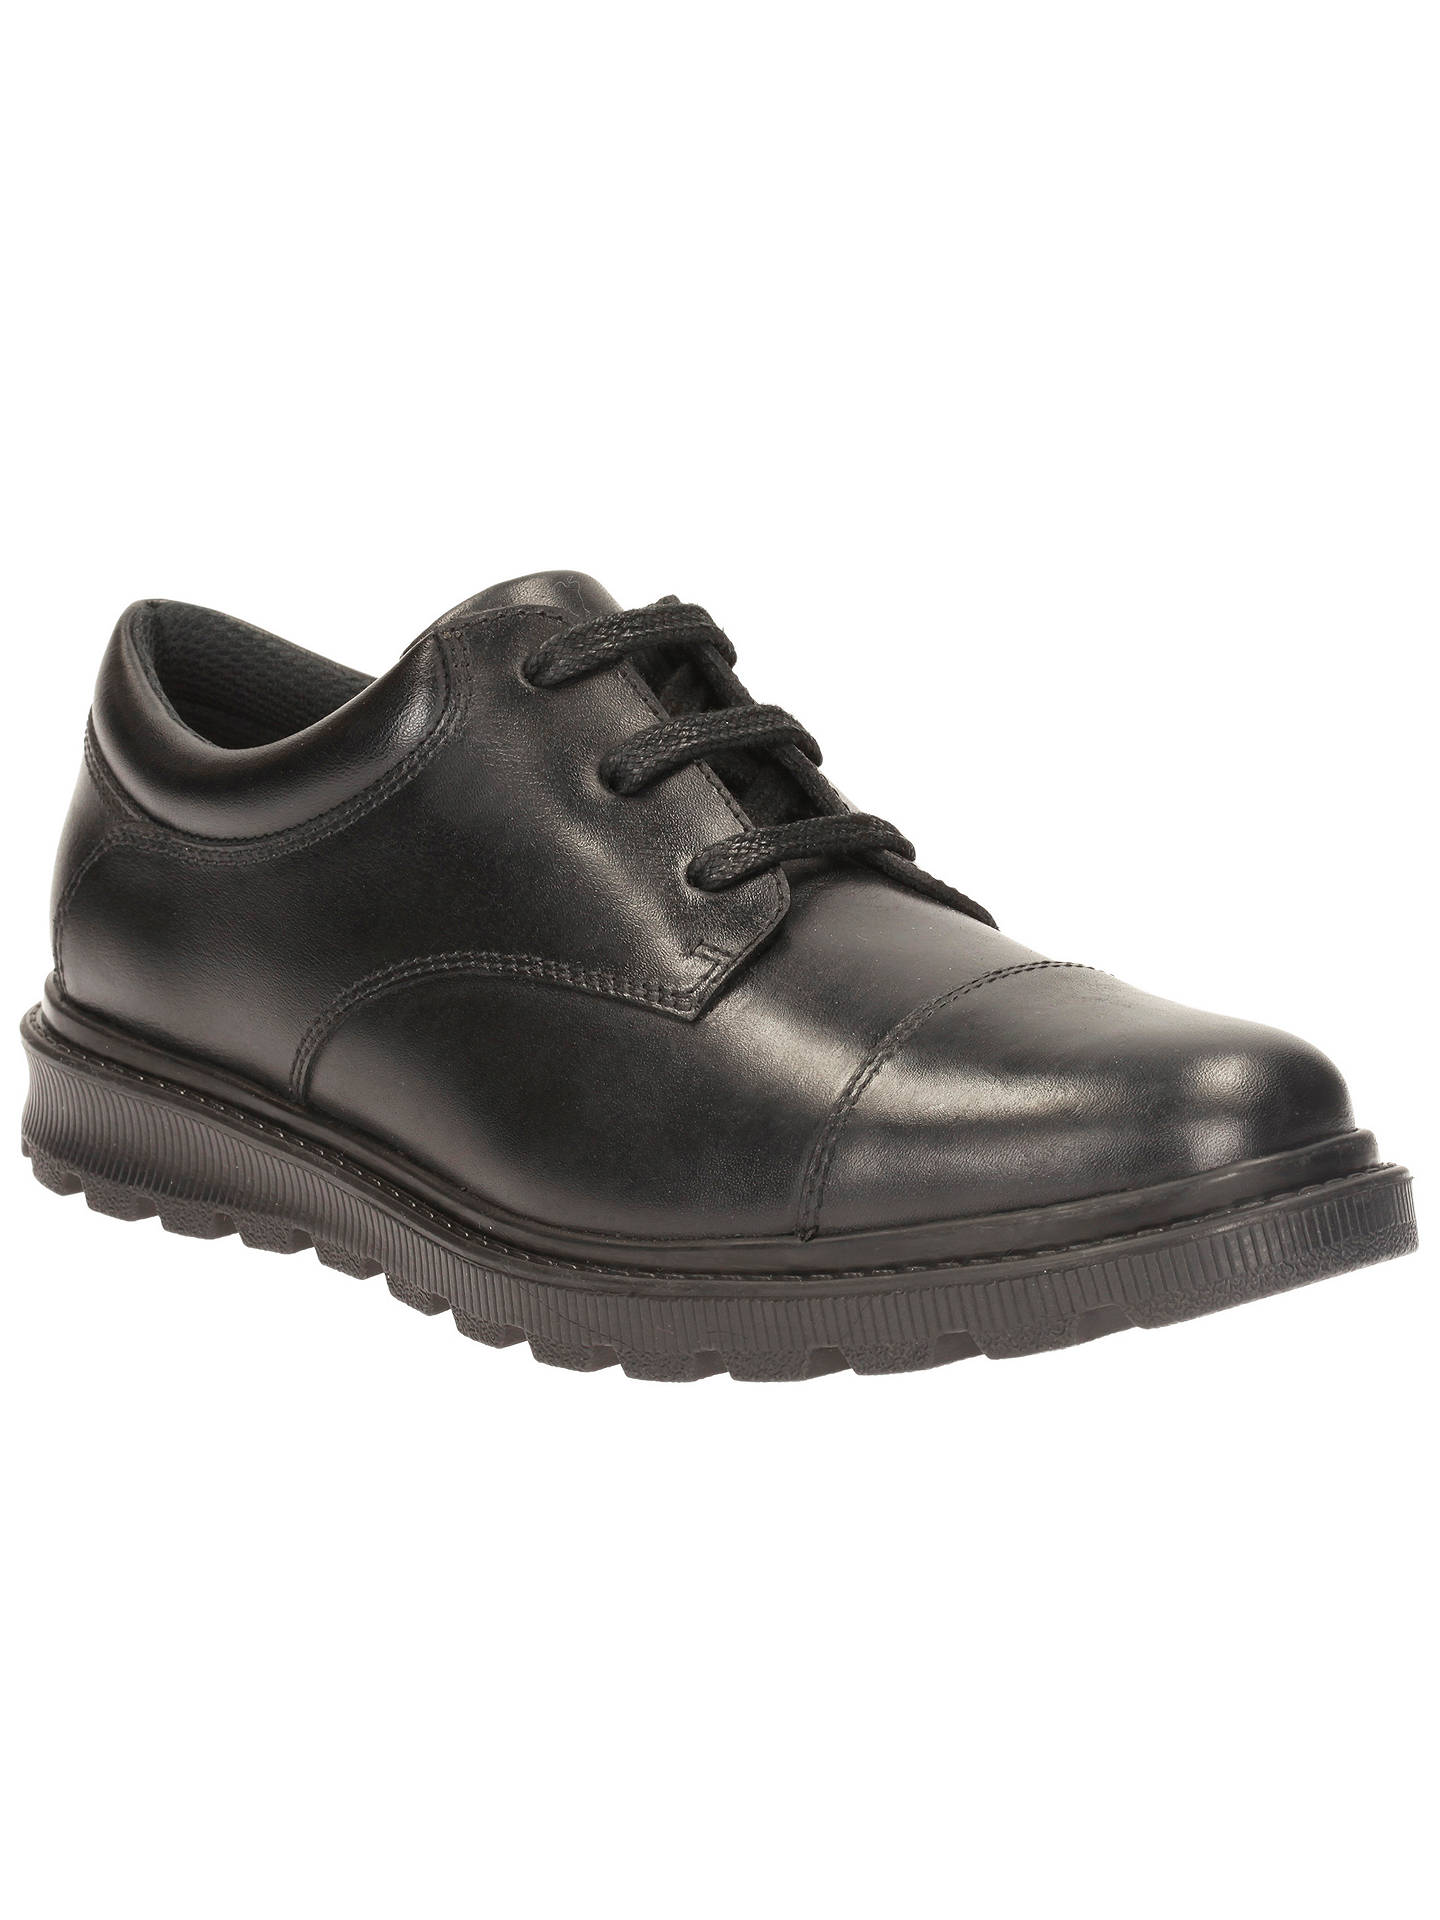 Clarks Children's Mayes Walk Leather Lace-Up School Shoes, Black at ...